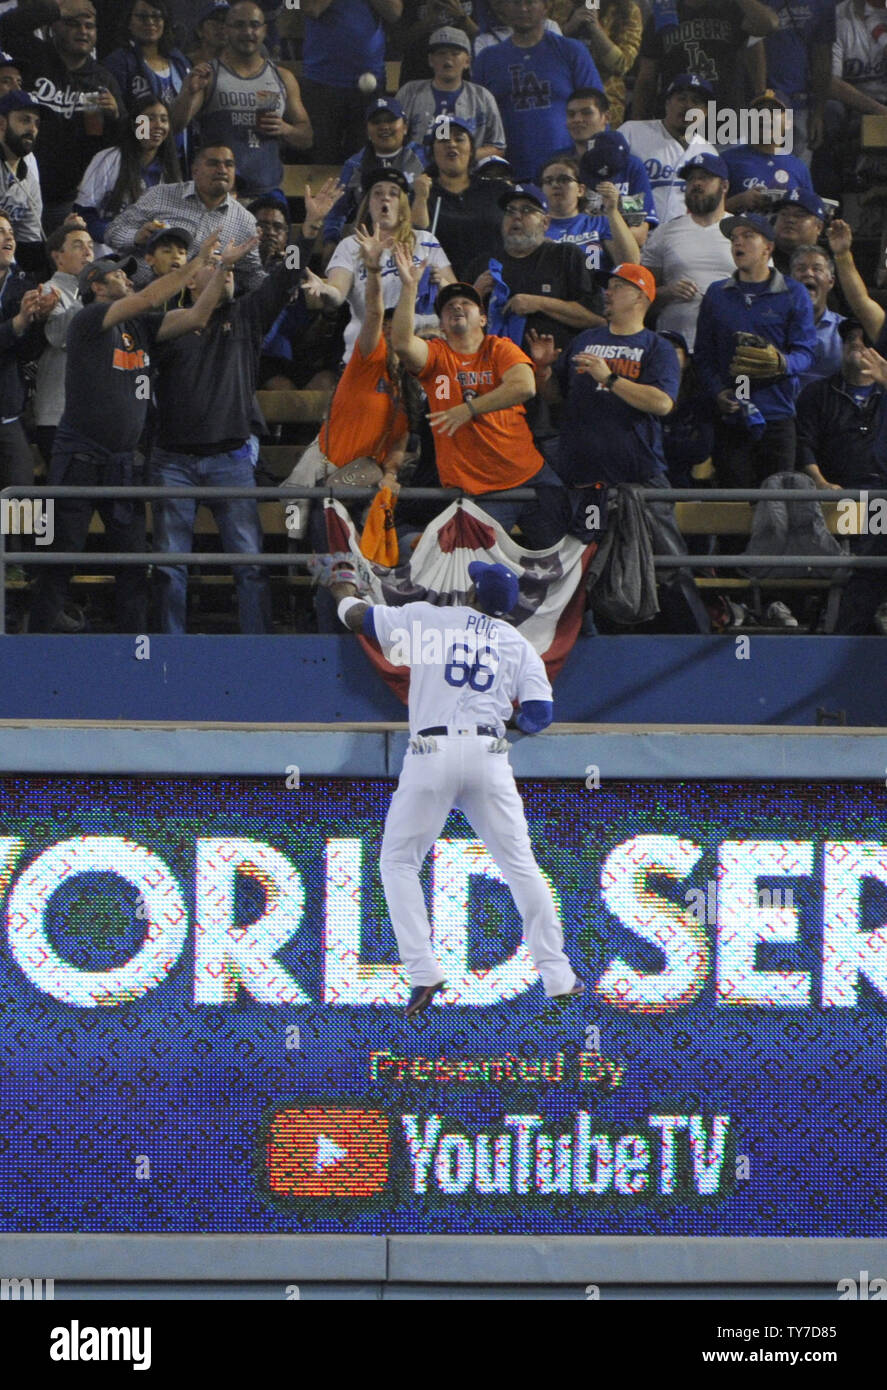 Los Angeles Dodgers right fielder Yasiel Puig (66) climbs the wall in a fruitless attempt to catch a home run by Houston Astros George Springer in the third inning of the 2017 MLB World Series game six at Dodger Stadium in Los Angeles on October 31, 2017. The Astros lead the Dodgers 3-2 in the best of seven game series.   Photo byLori Shepler/UPI Stock Photo